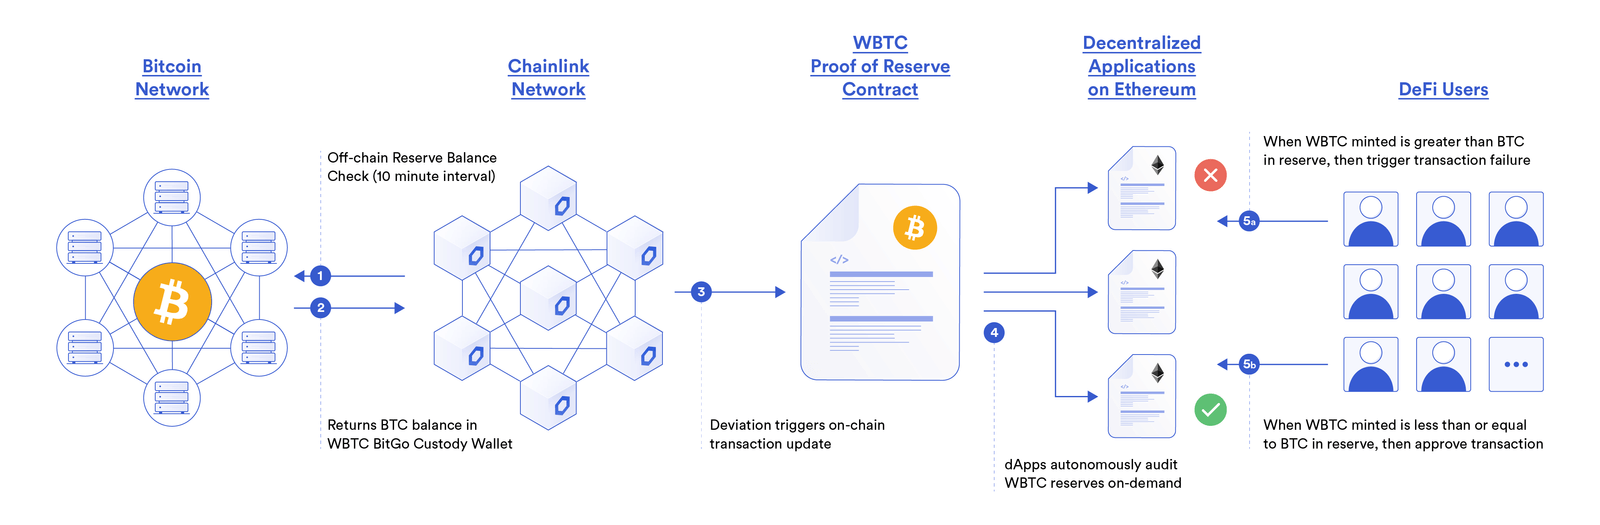 Chainlink Proof of Reserve provides smart contracts proof of the Bitcoin collateral backing BitGo’s Wrapped BTC (WBTC)